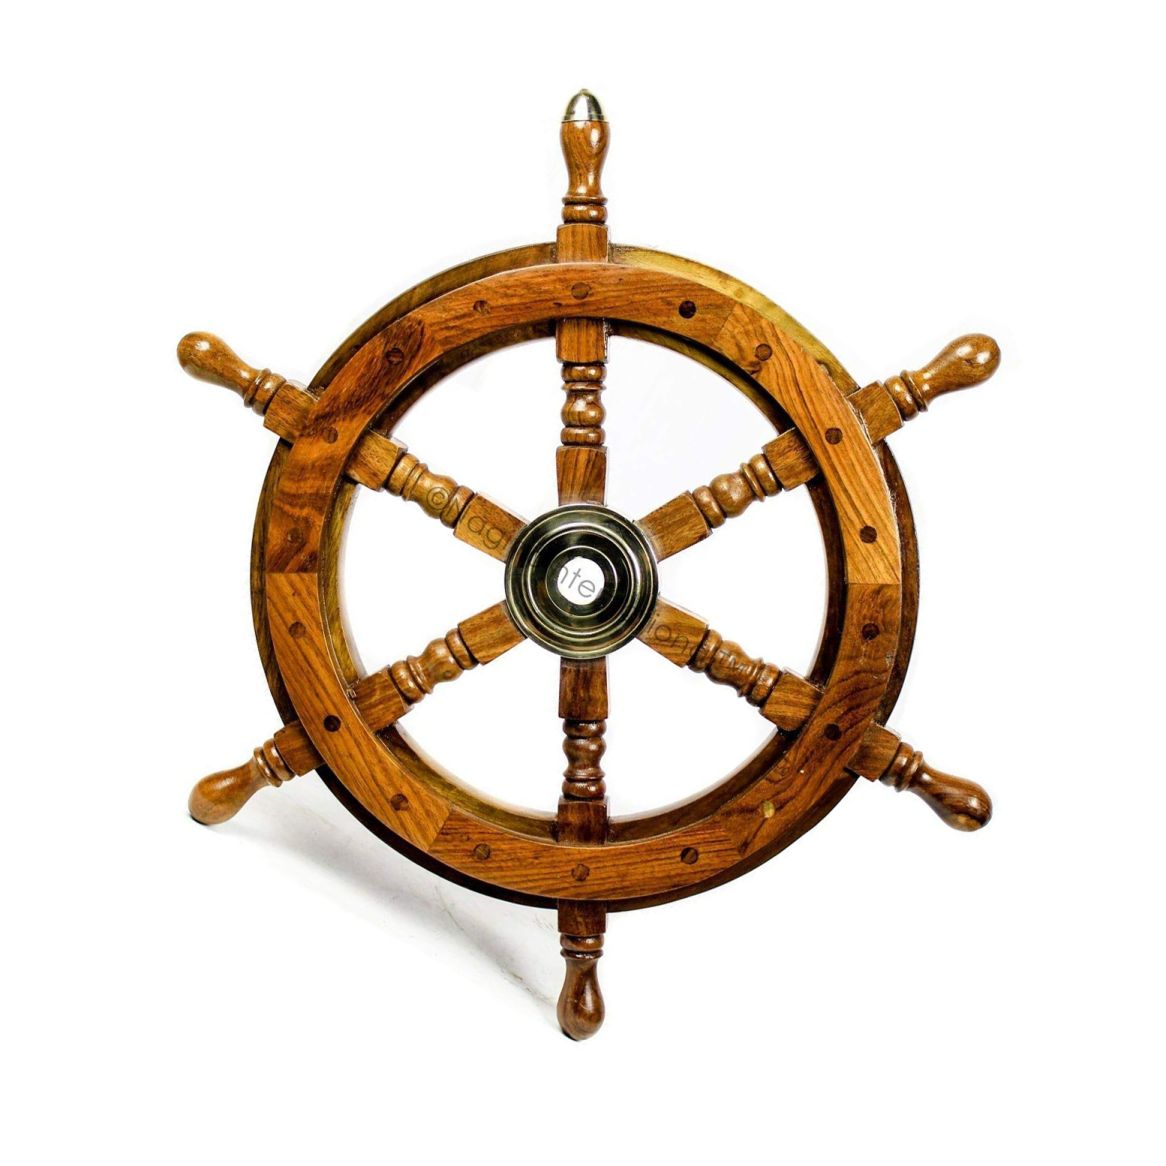 Details about   SHIP WHEEL 18 Inch Collectible Wall Wooden Decor Brown Brass Nautical Vintage 